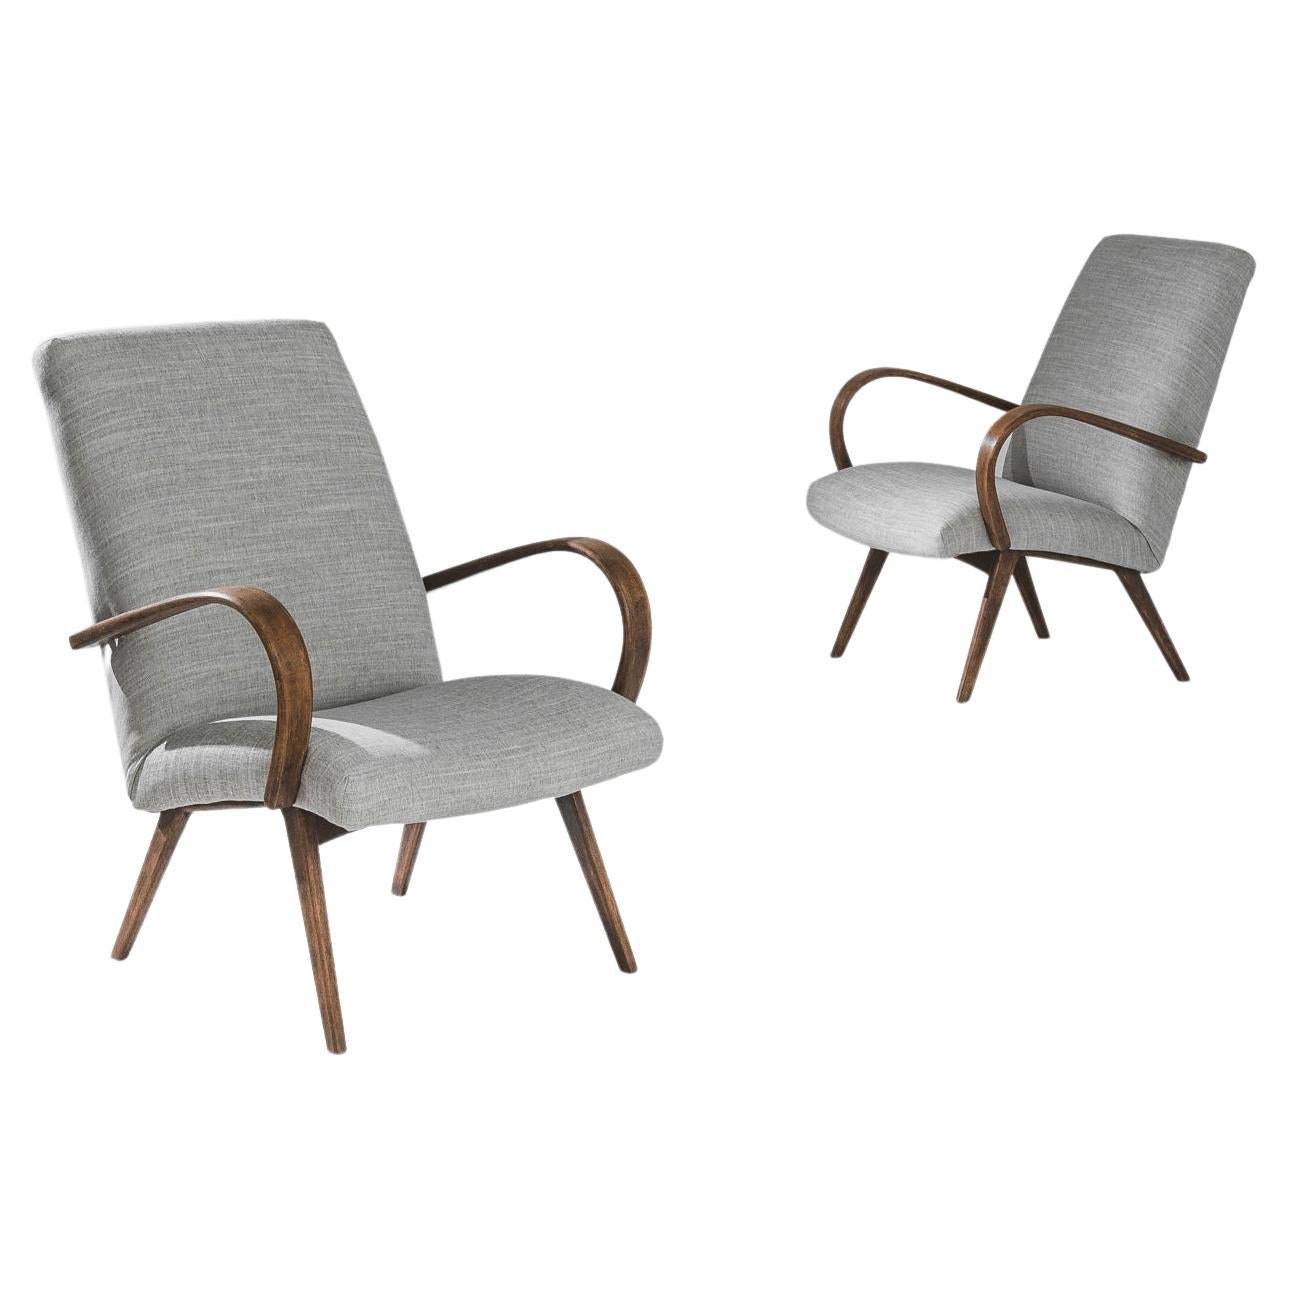 1950s Czech Gray Upholstered Armchairs, a Pair For Sale